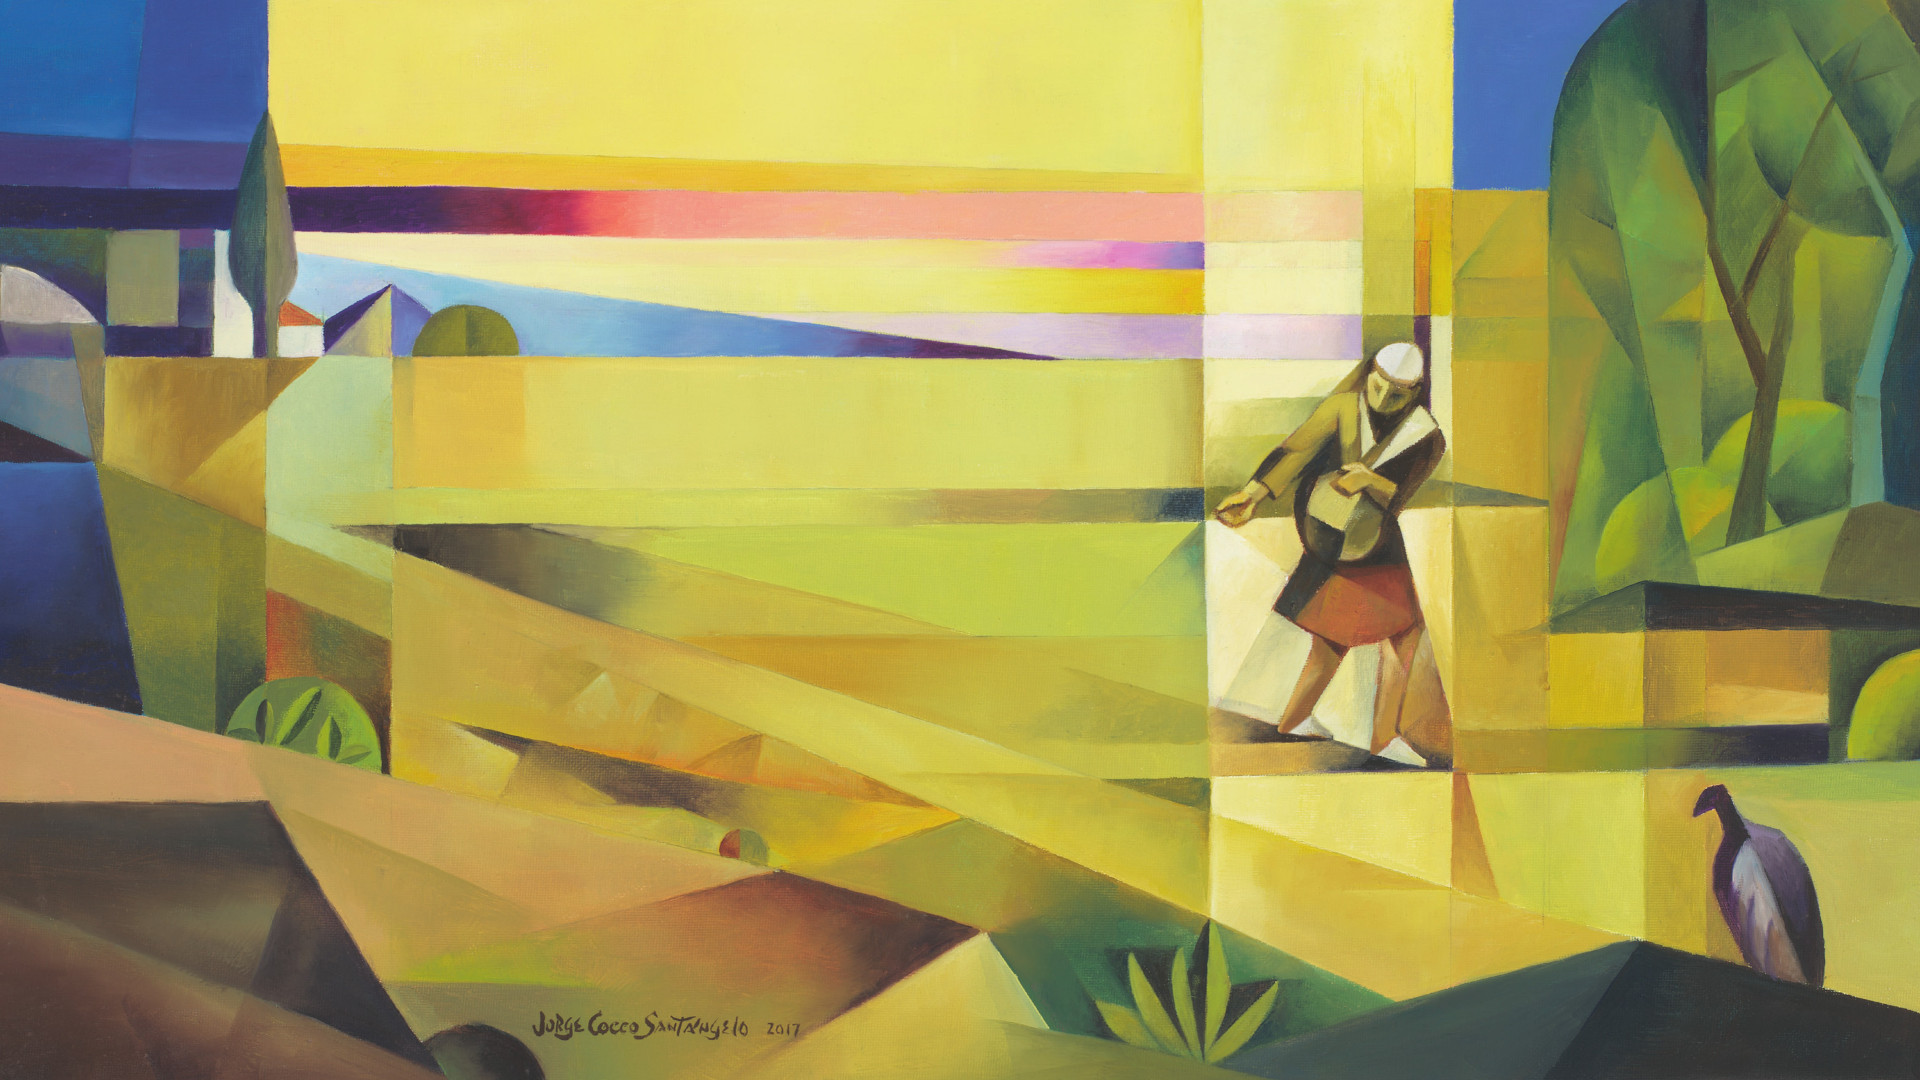 Jorge Cocco's painting, "The Sower," which depicts a man walking with a bag of seeds and tossing them into soil on his path, as described in Jesus's parable.